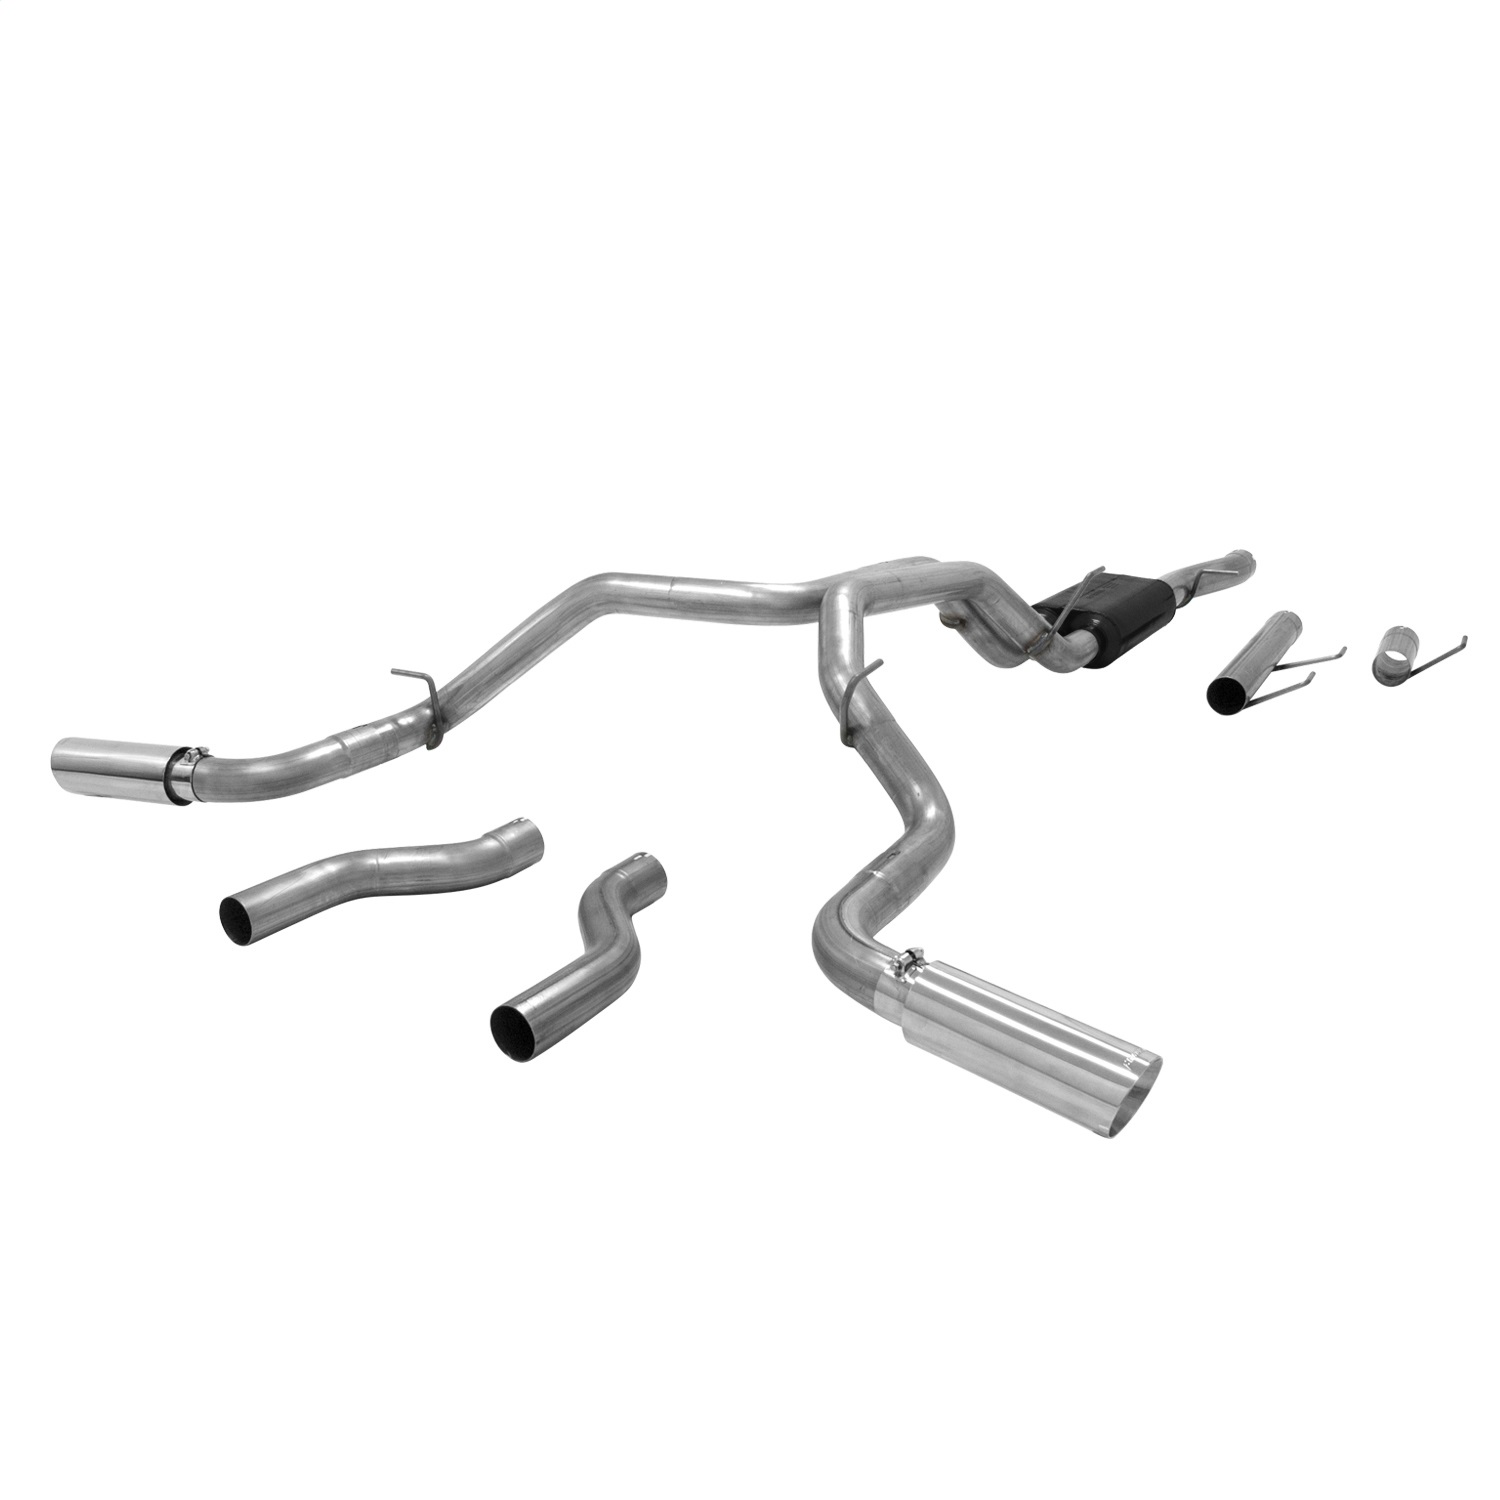 Flowmaster 817709 American Thunder Cat Back Exhaust System Fits 14-17 2500